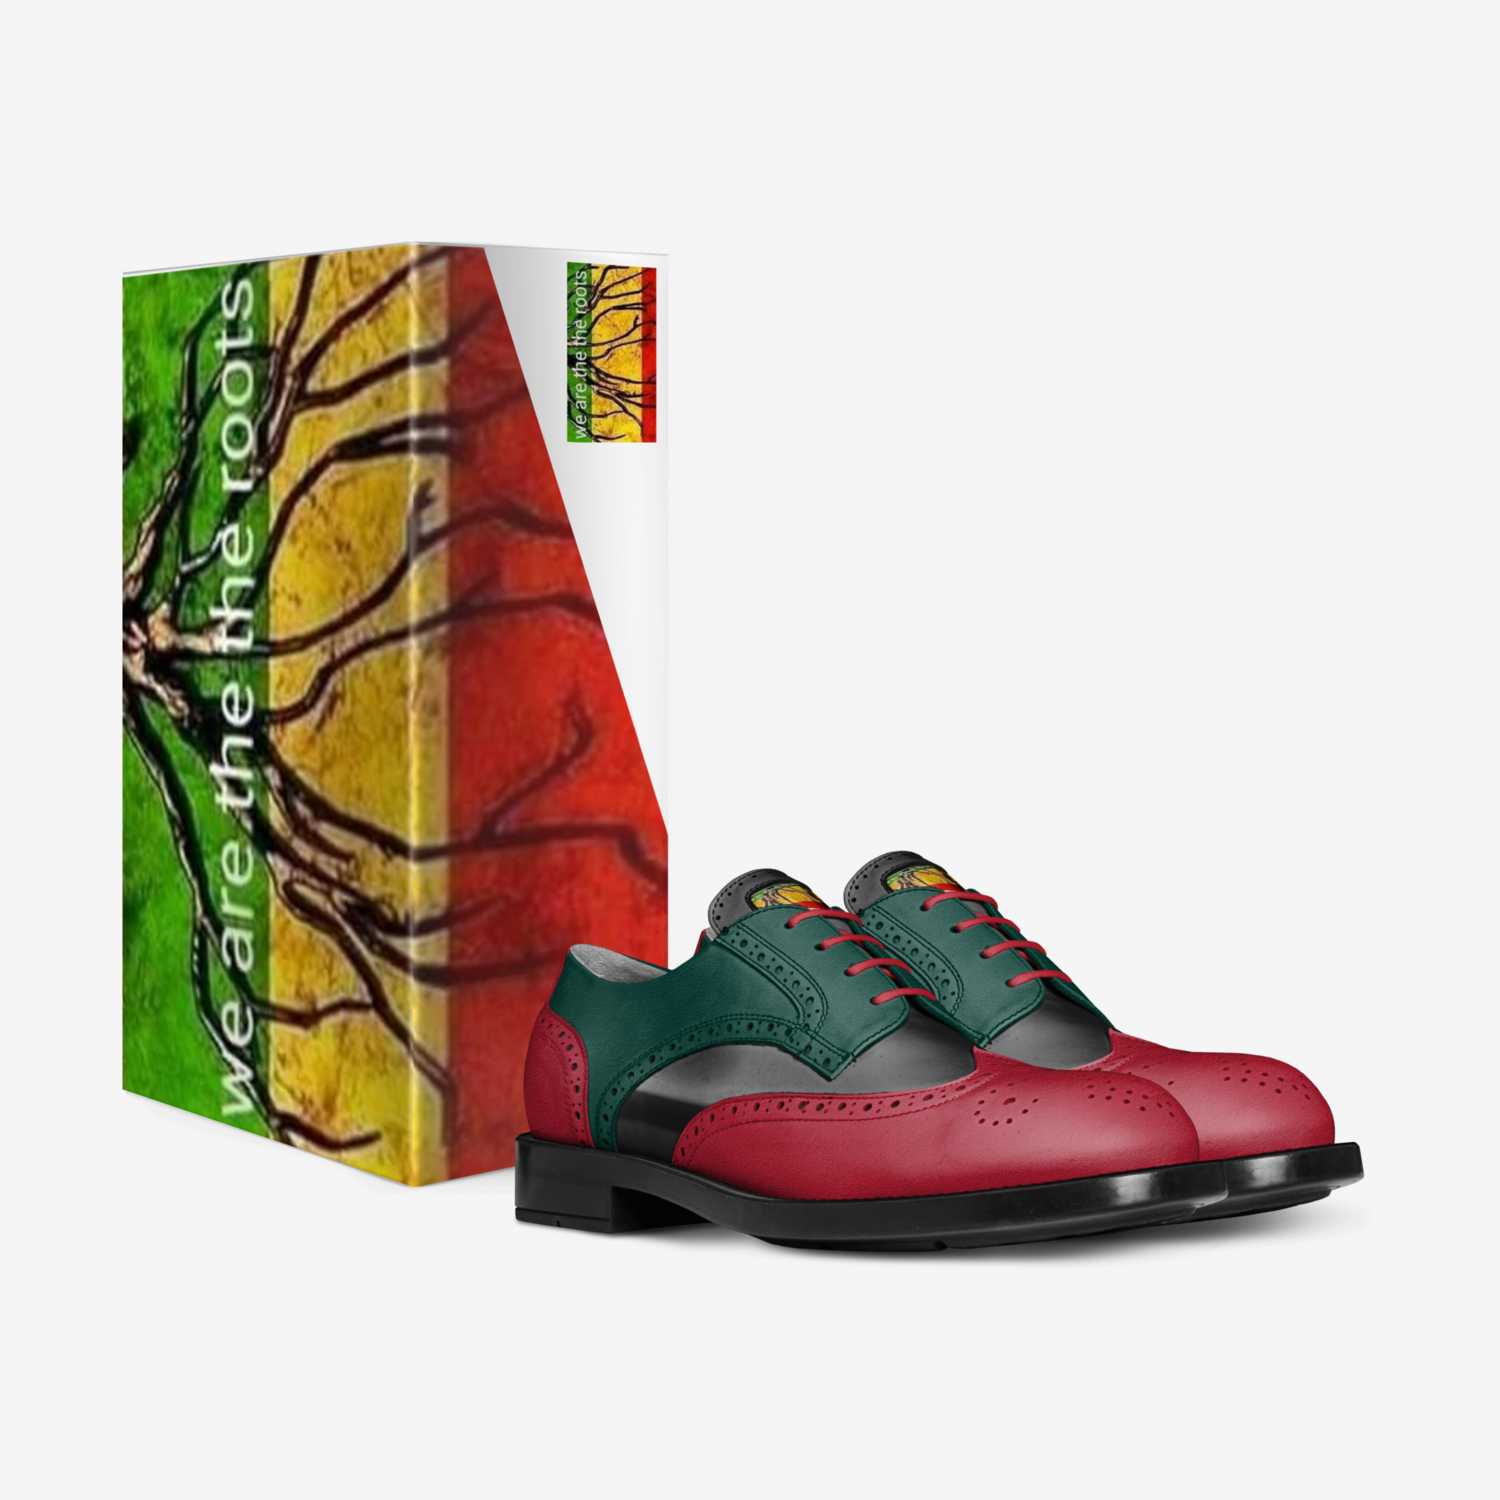 BLOOD MONEY custom made in Italy shoes by Adonis King | Box view